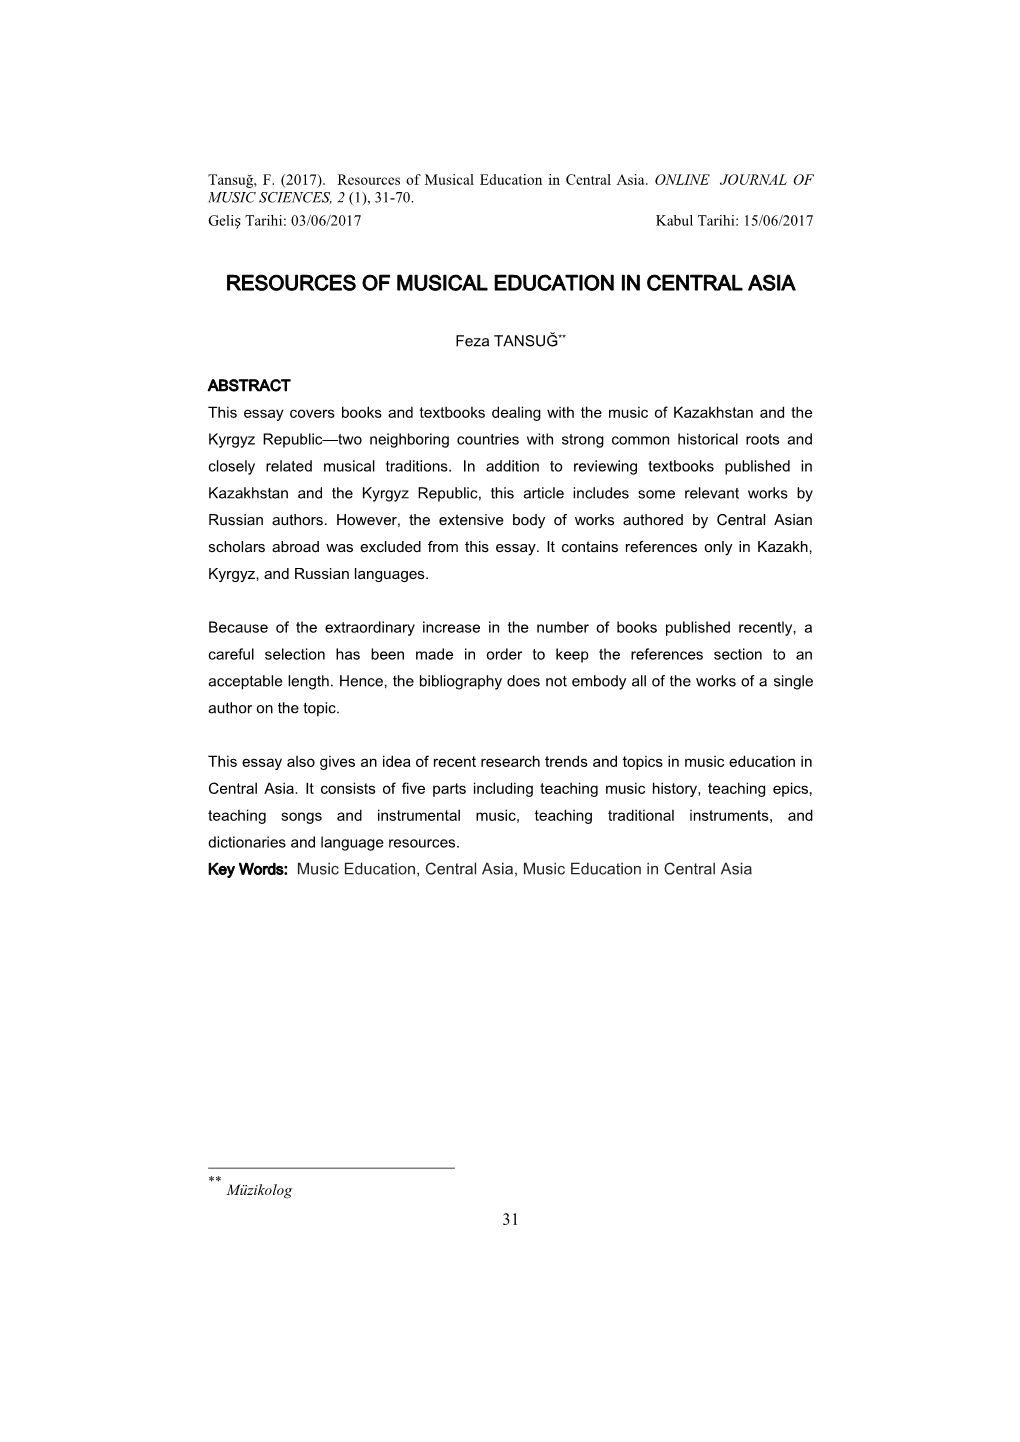 Resources of Musical Education in Central Asia